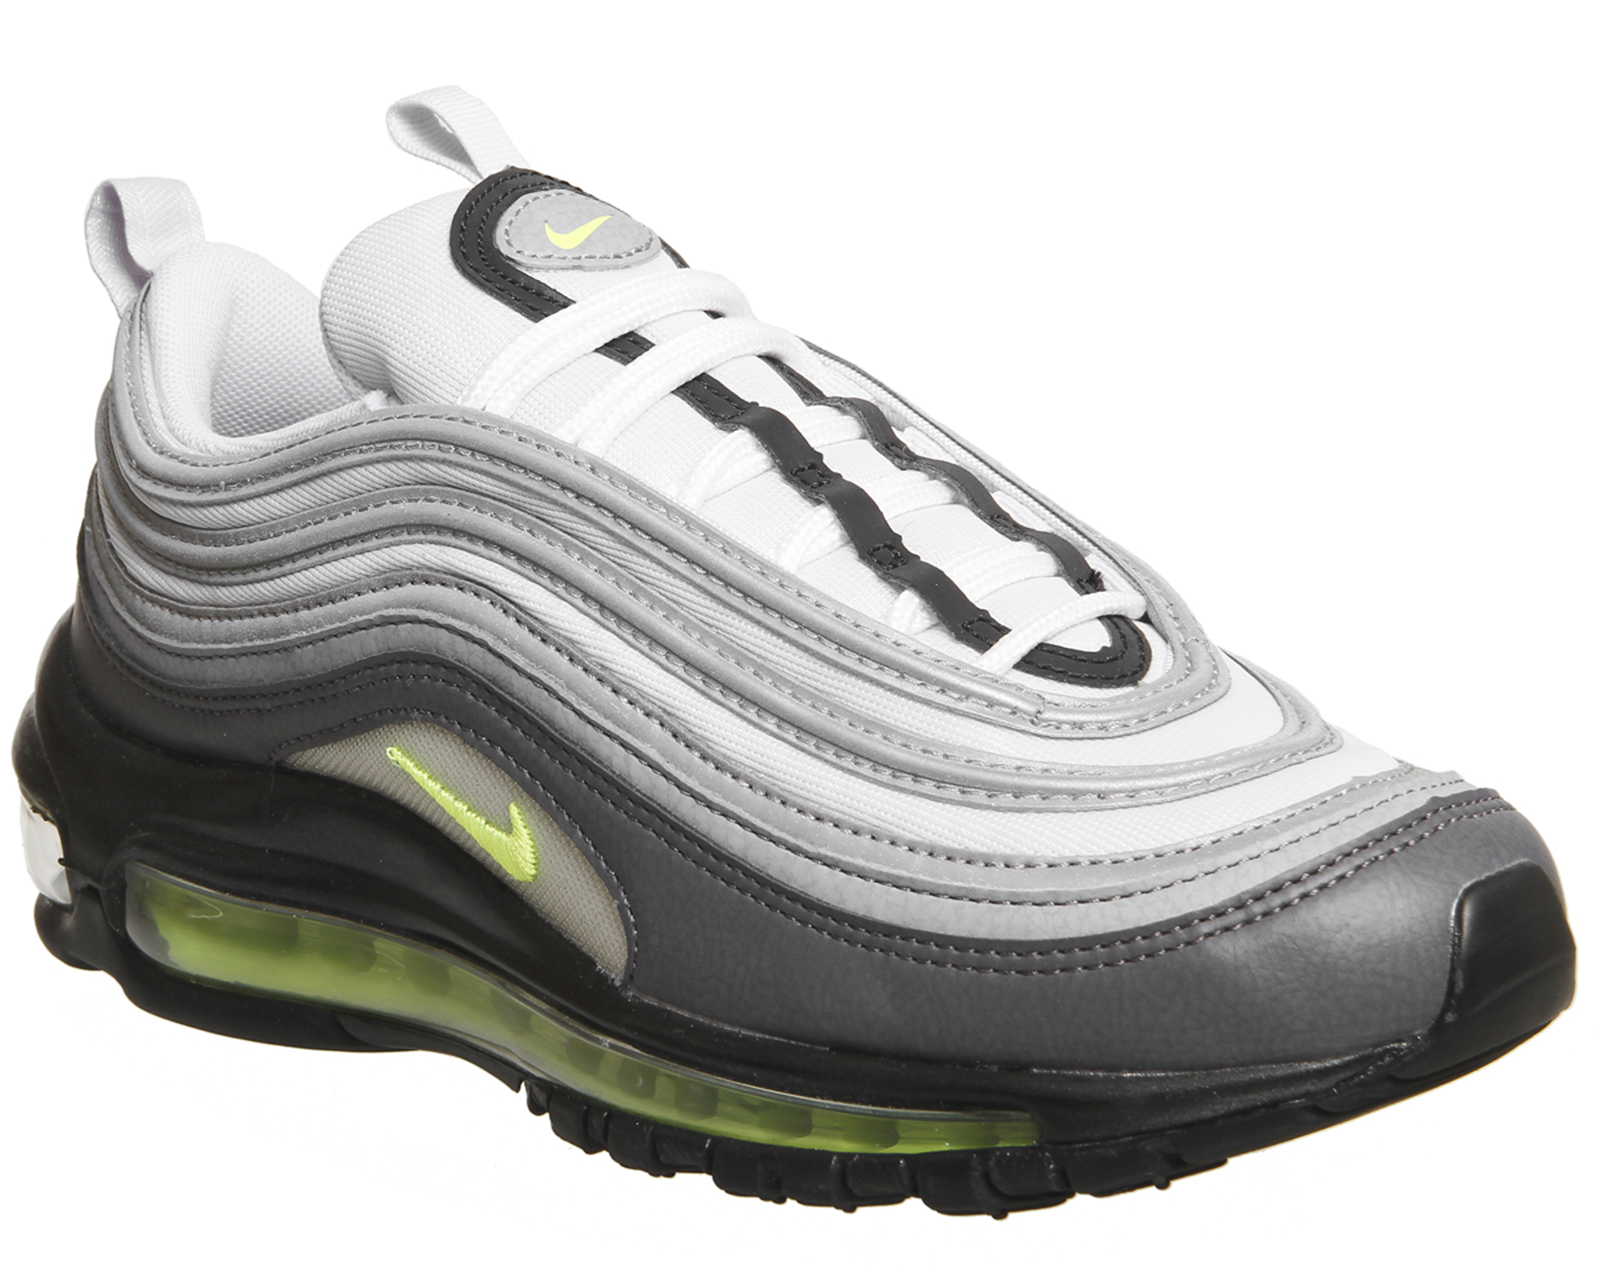 Nike Air Max 97 Trainers Dark Grey Volt - Hers trainers